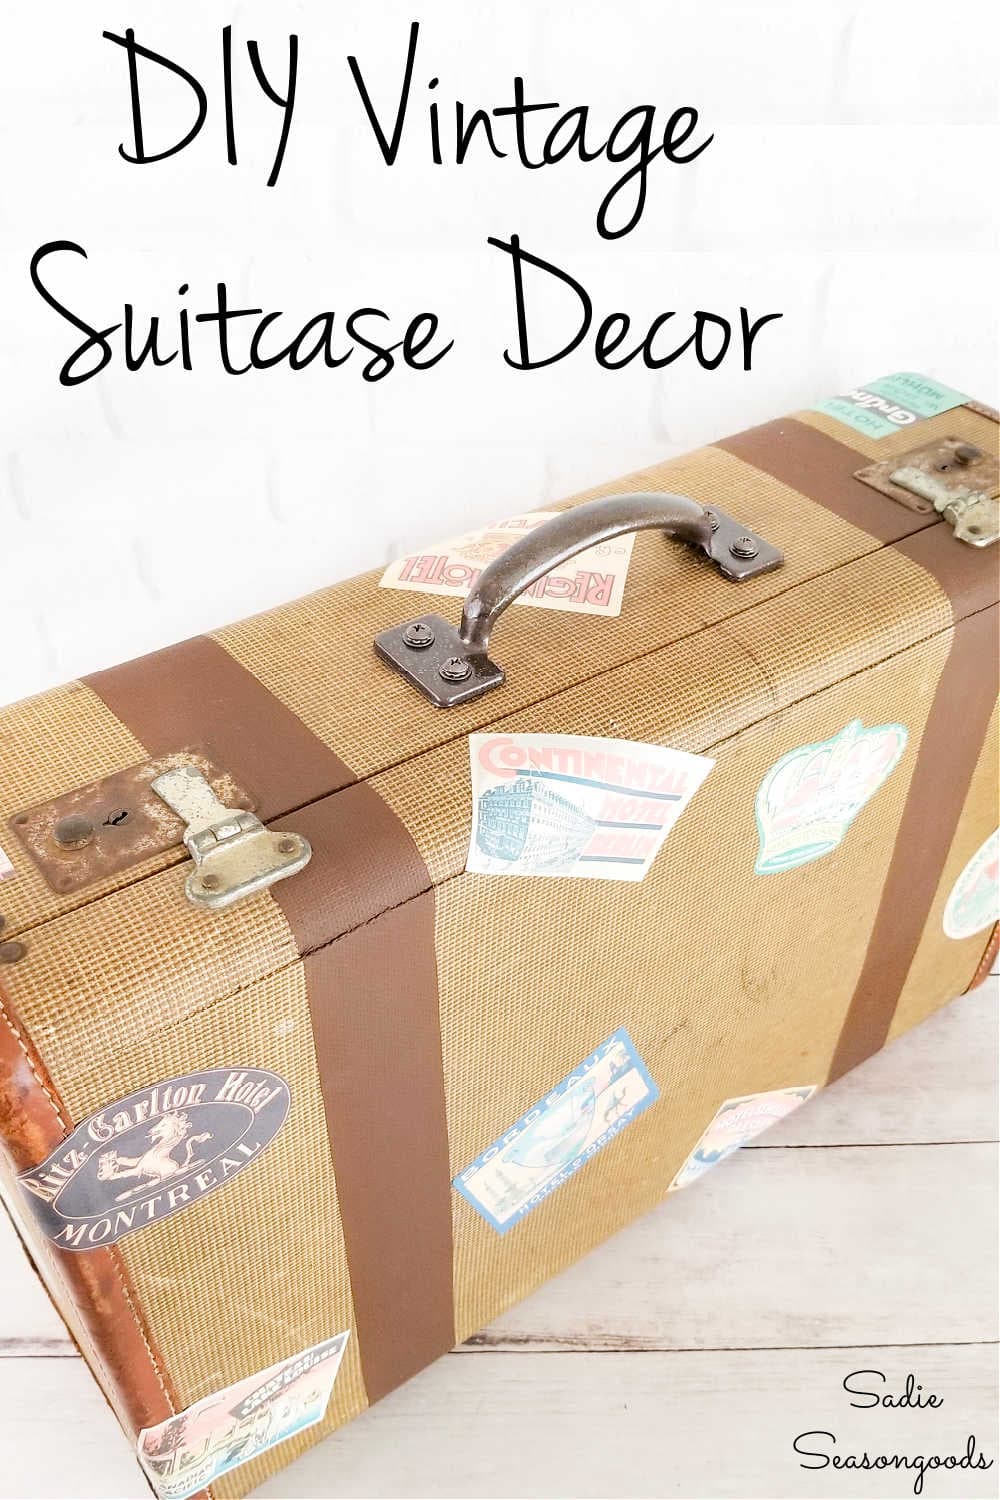 old suitcase for vintage luggage decor